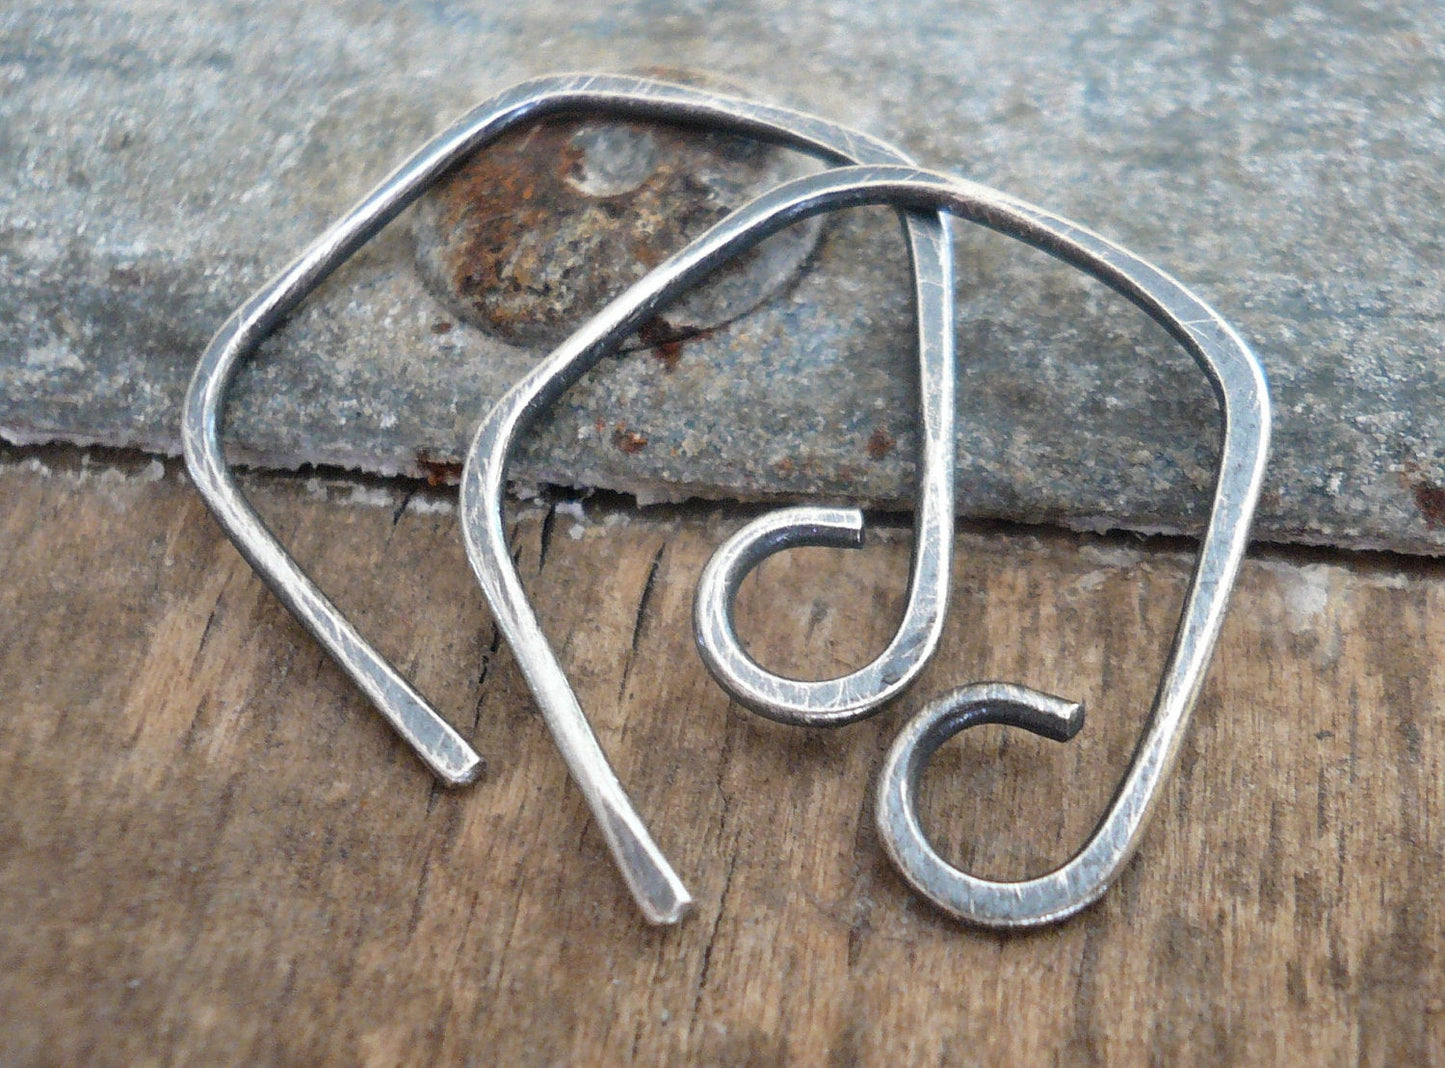 Whirlpool Sterling Silver Earwires - Handmade. Handforged. Oxidized & polished